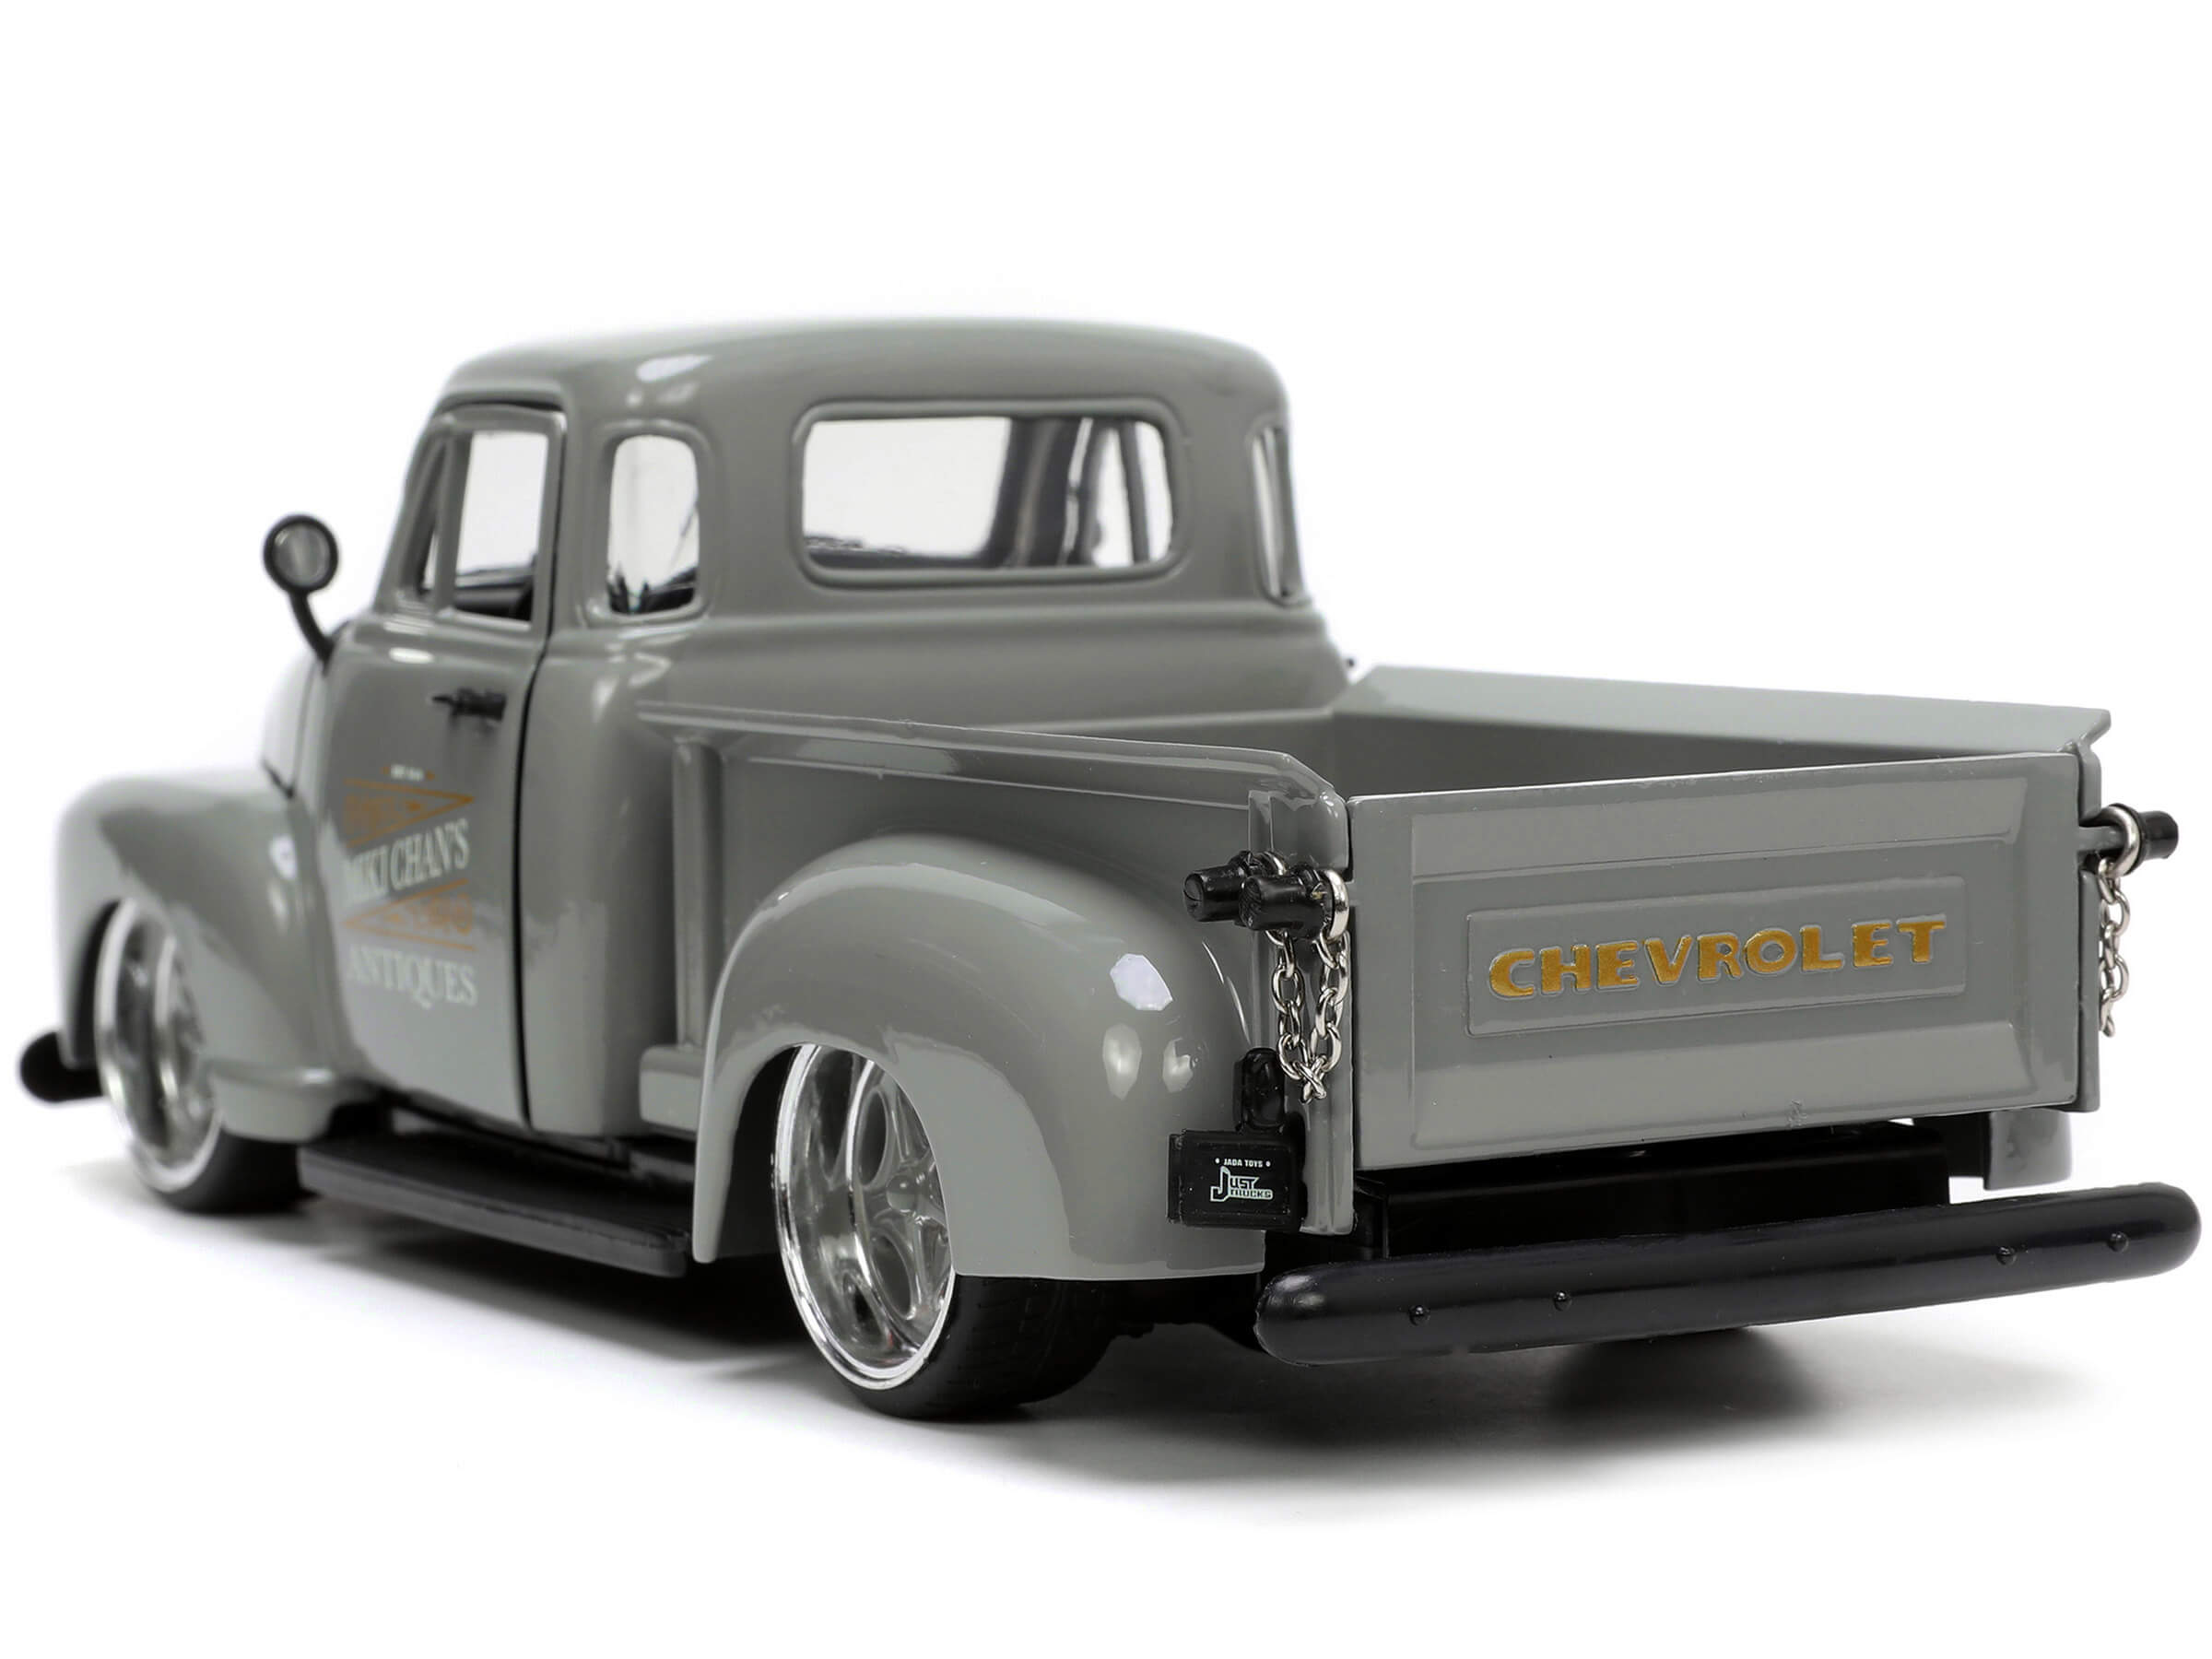 1953 Chevrolet Pickup Truck Gray "Miki Chan's Antiques" with Extra Wheels "Just Trucks" Series 1/24 Diecast Model Car by Jada